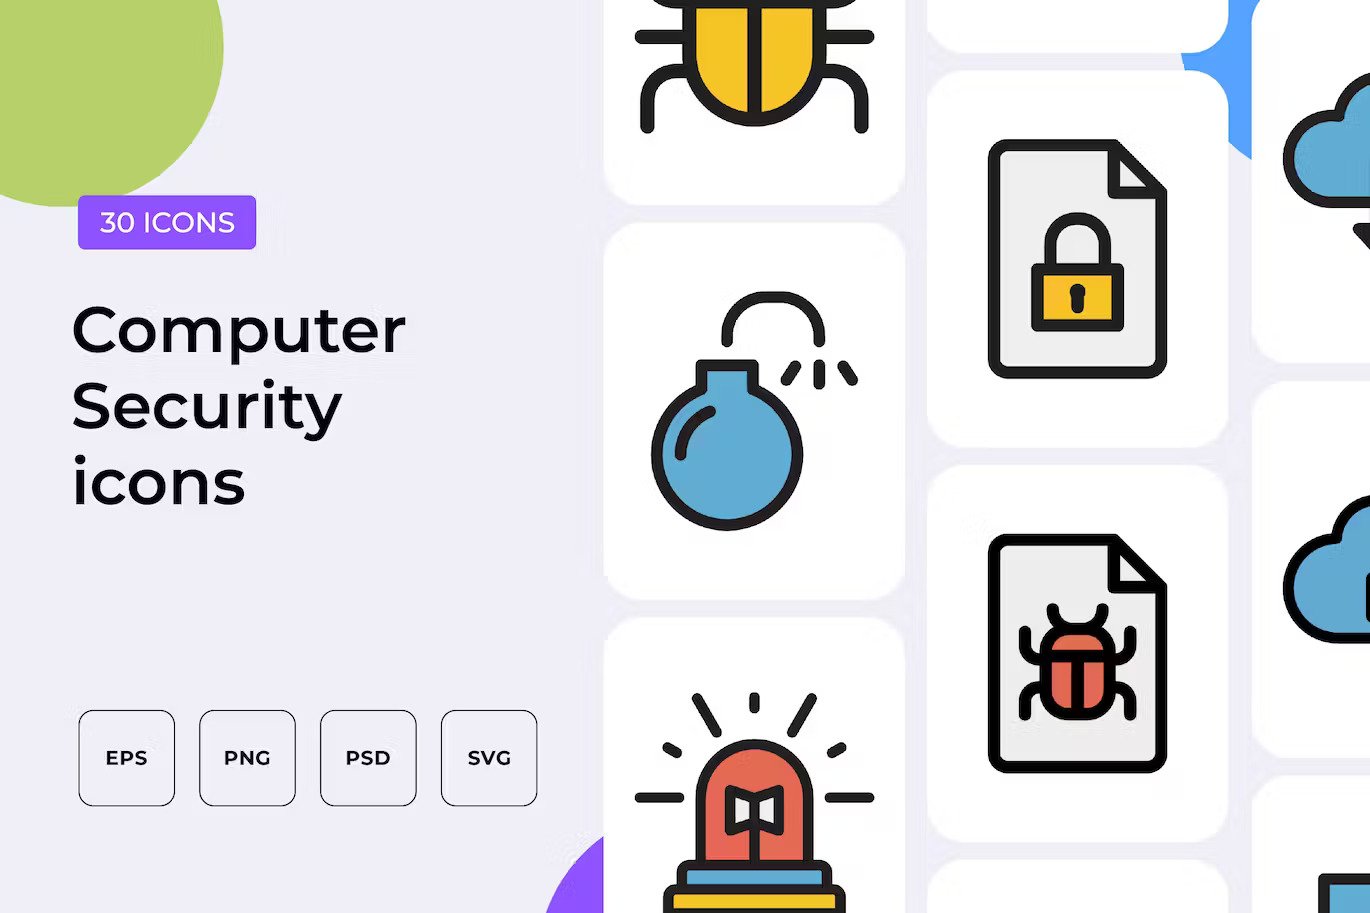 A computer security icons